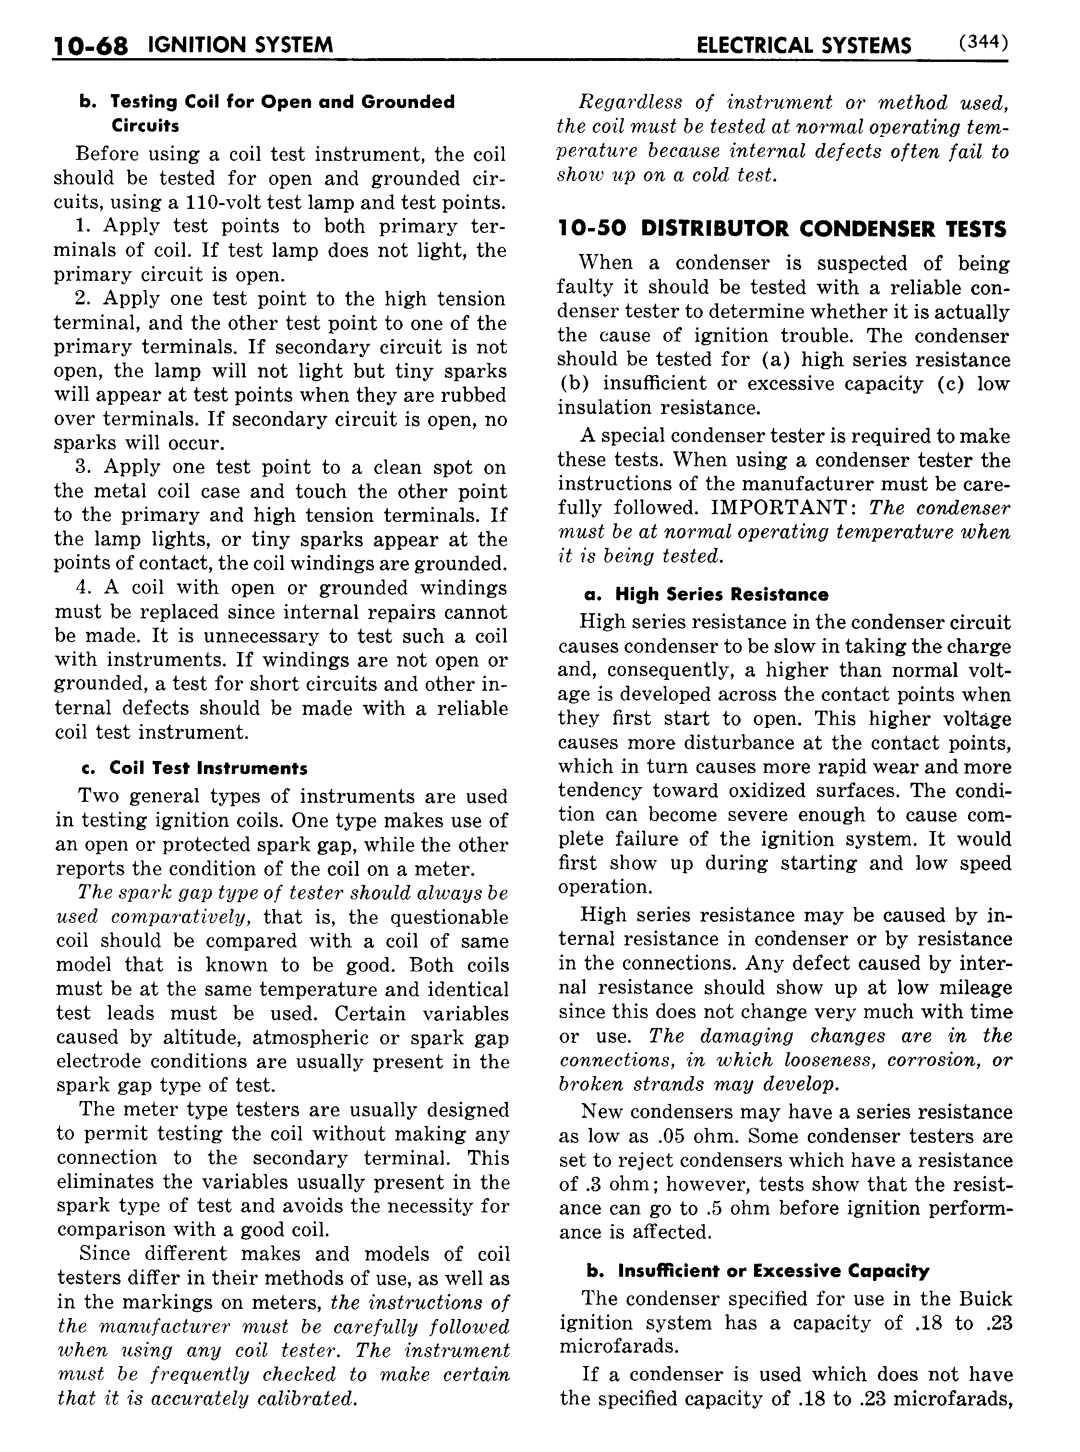 n_11 1948 Buick Shop Manual - Electrical Systems-068-068.jpg